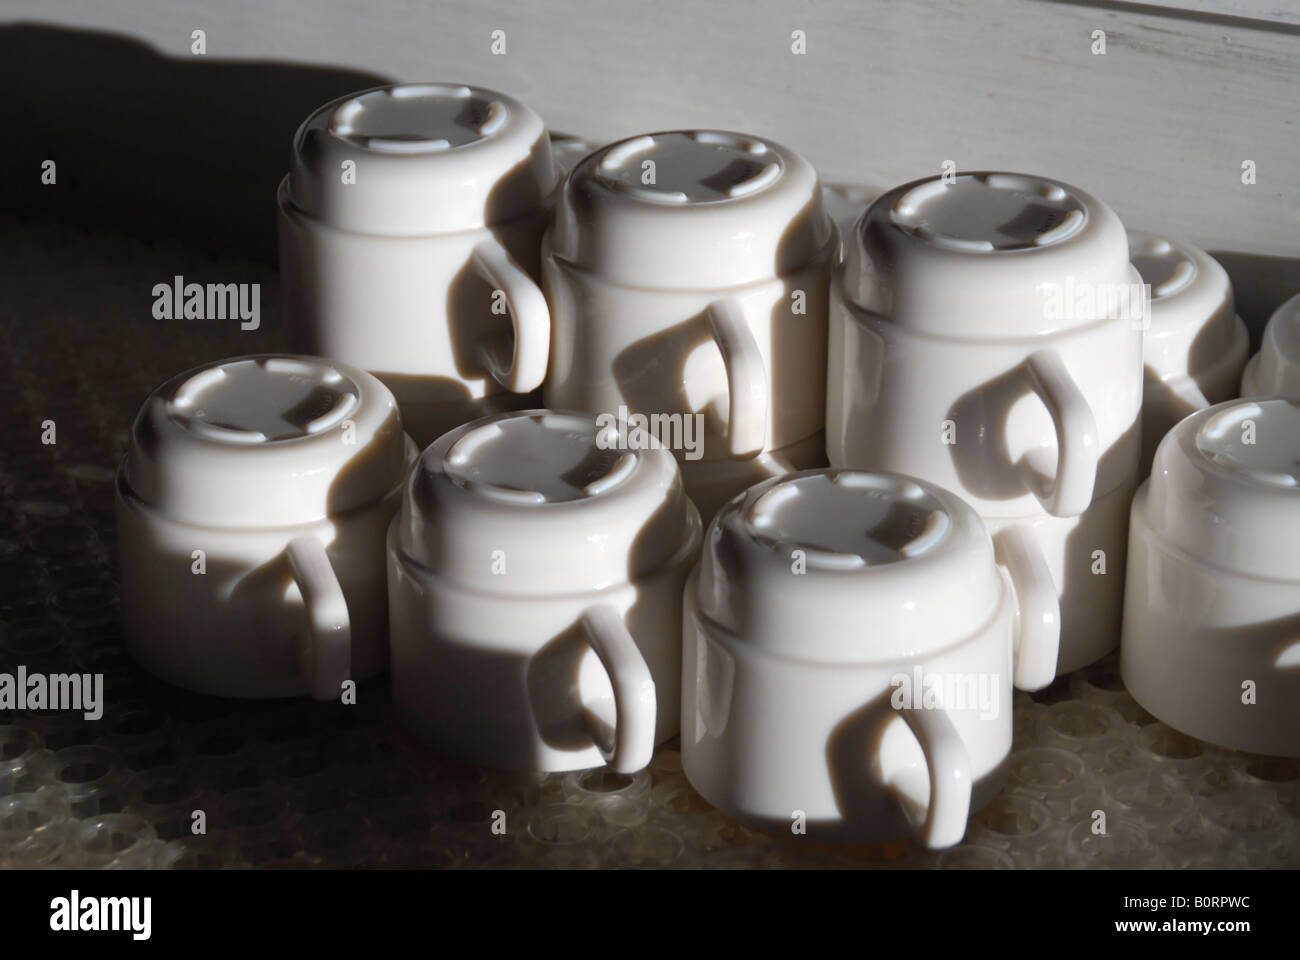 The range of the reversed coffee cups Stock Photo